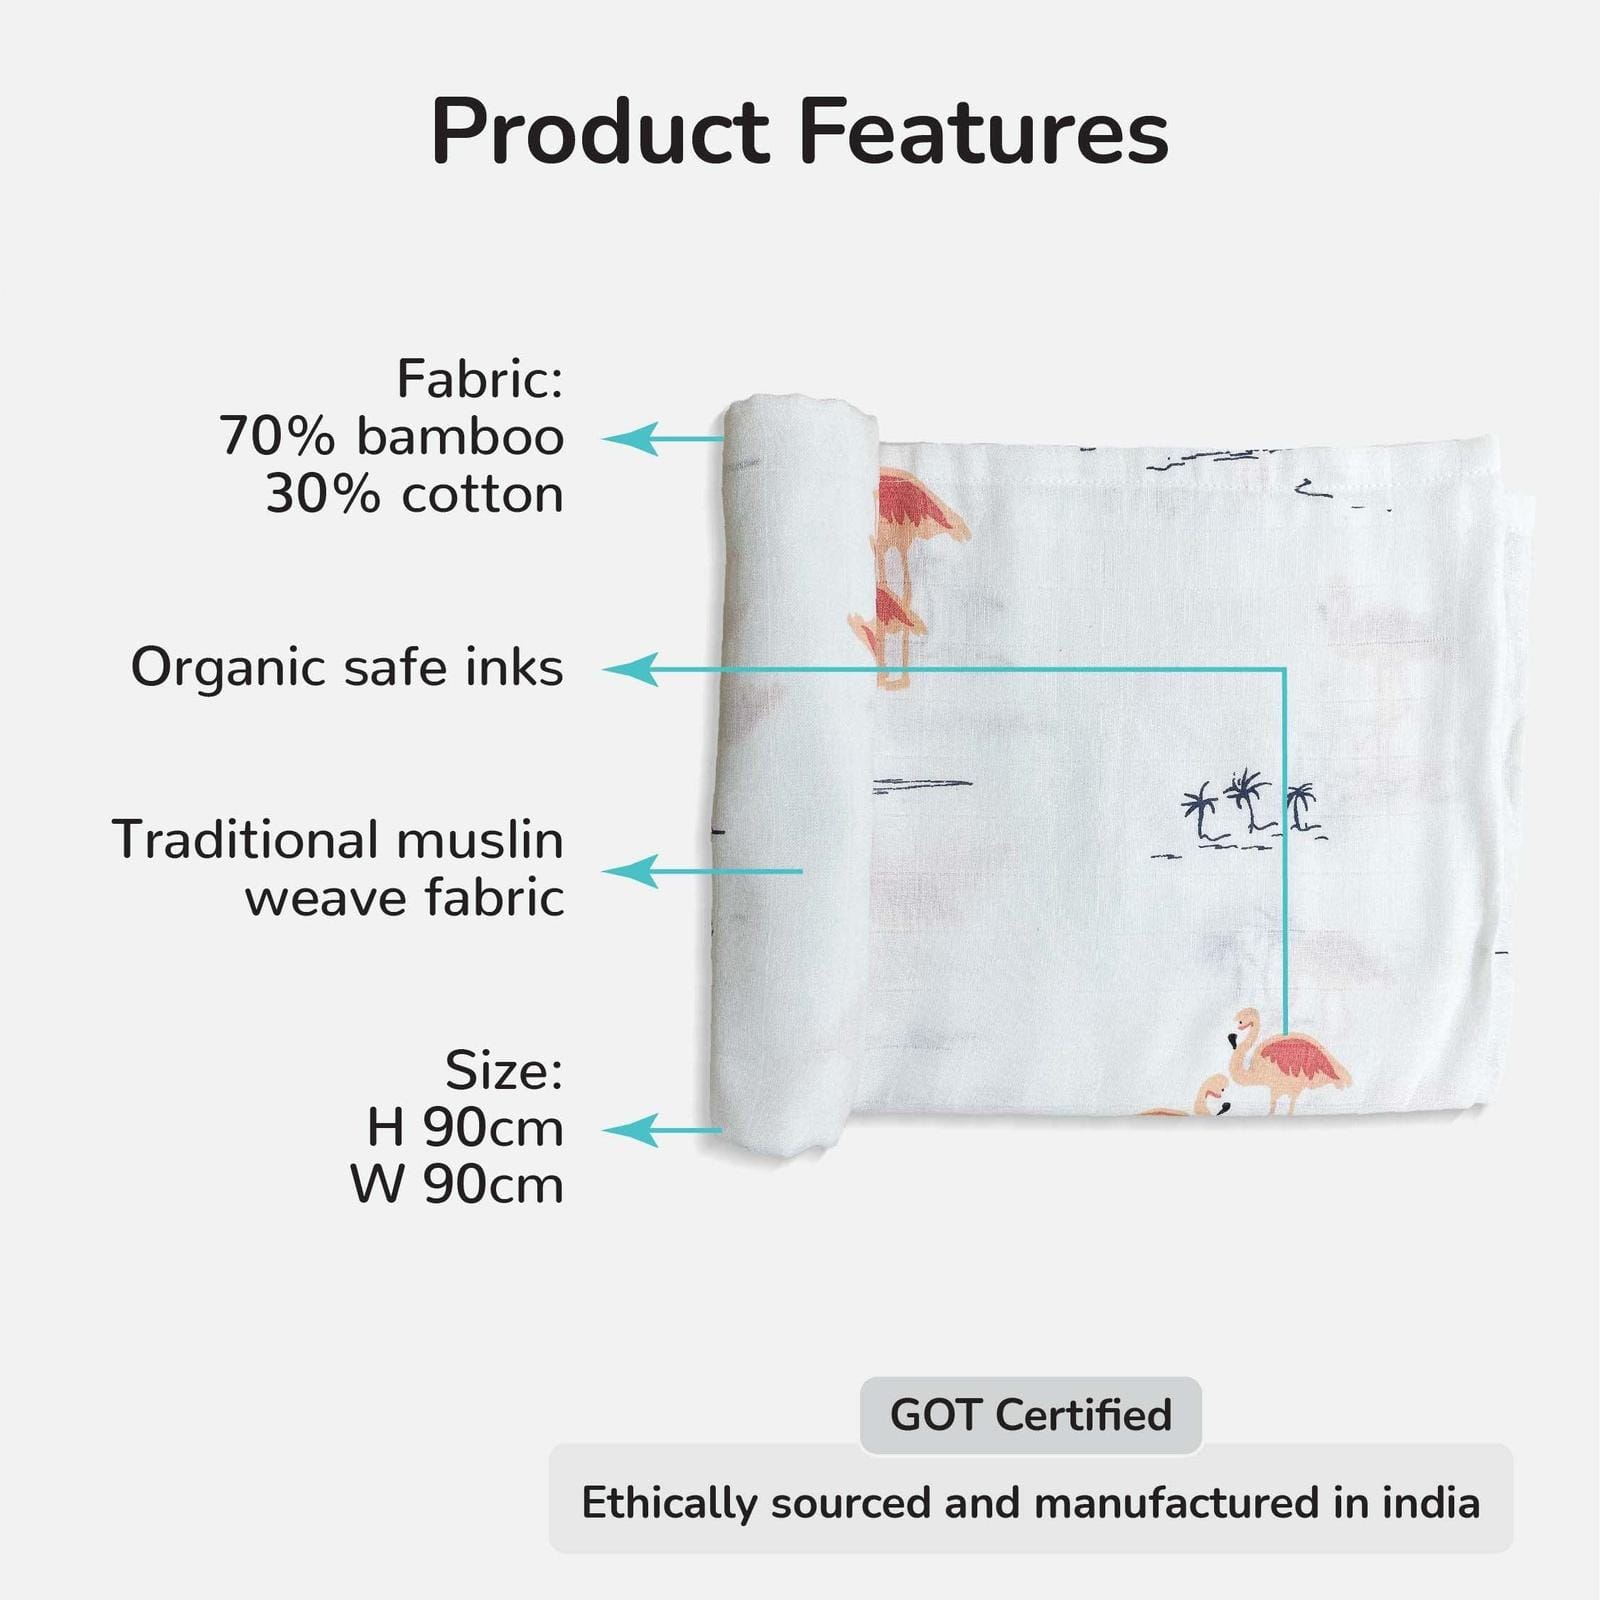 Baby Swaddle Features